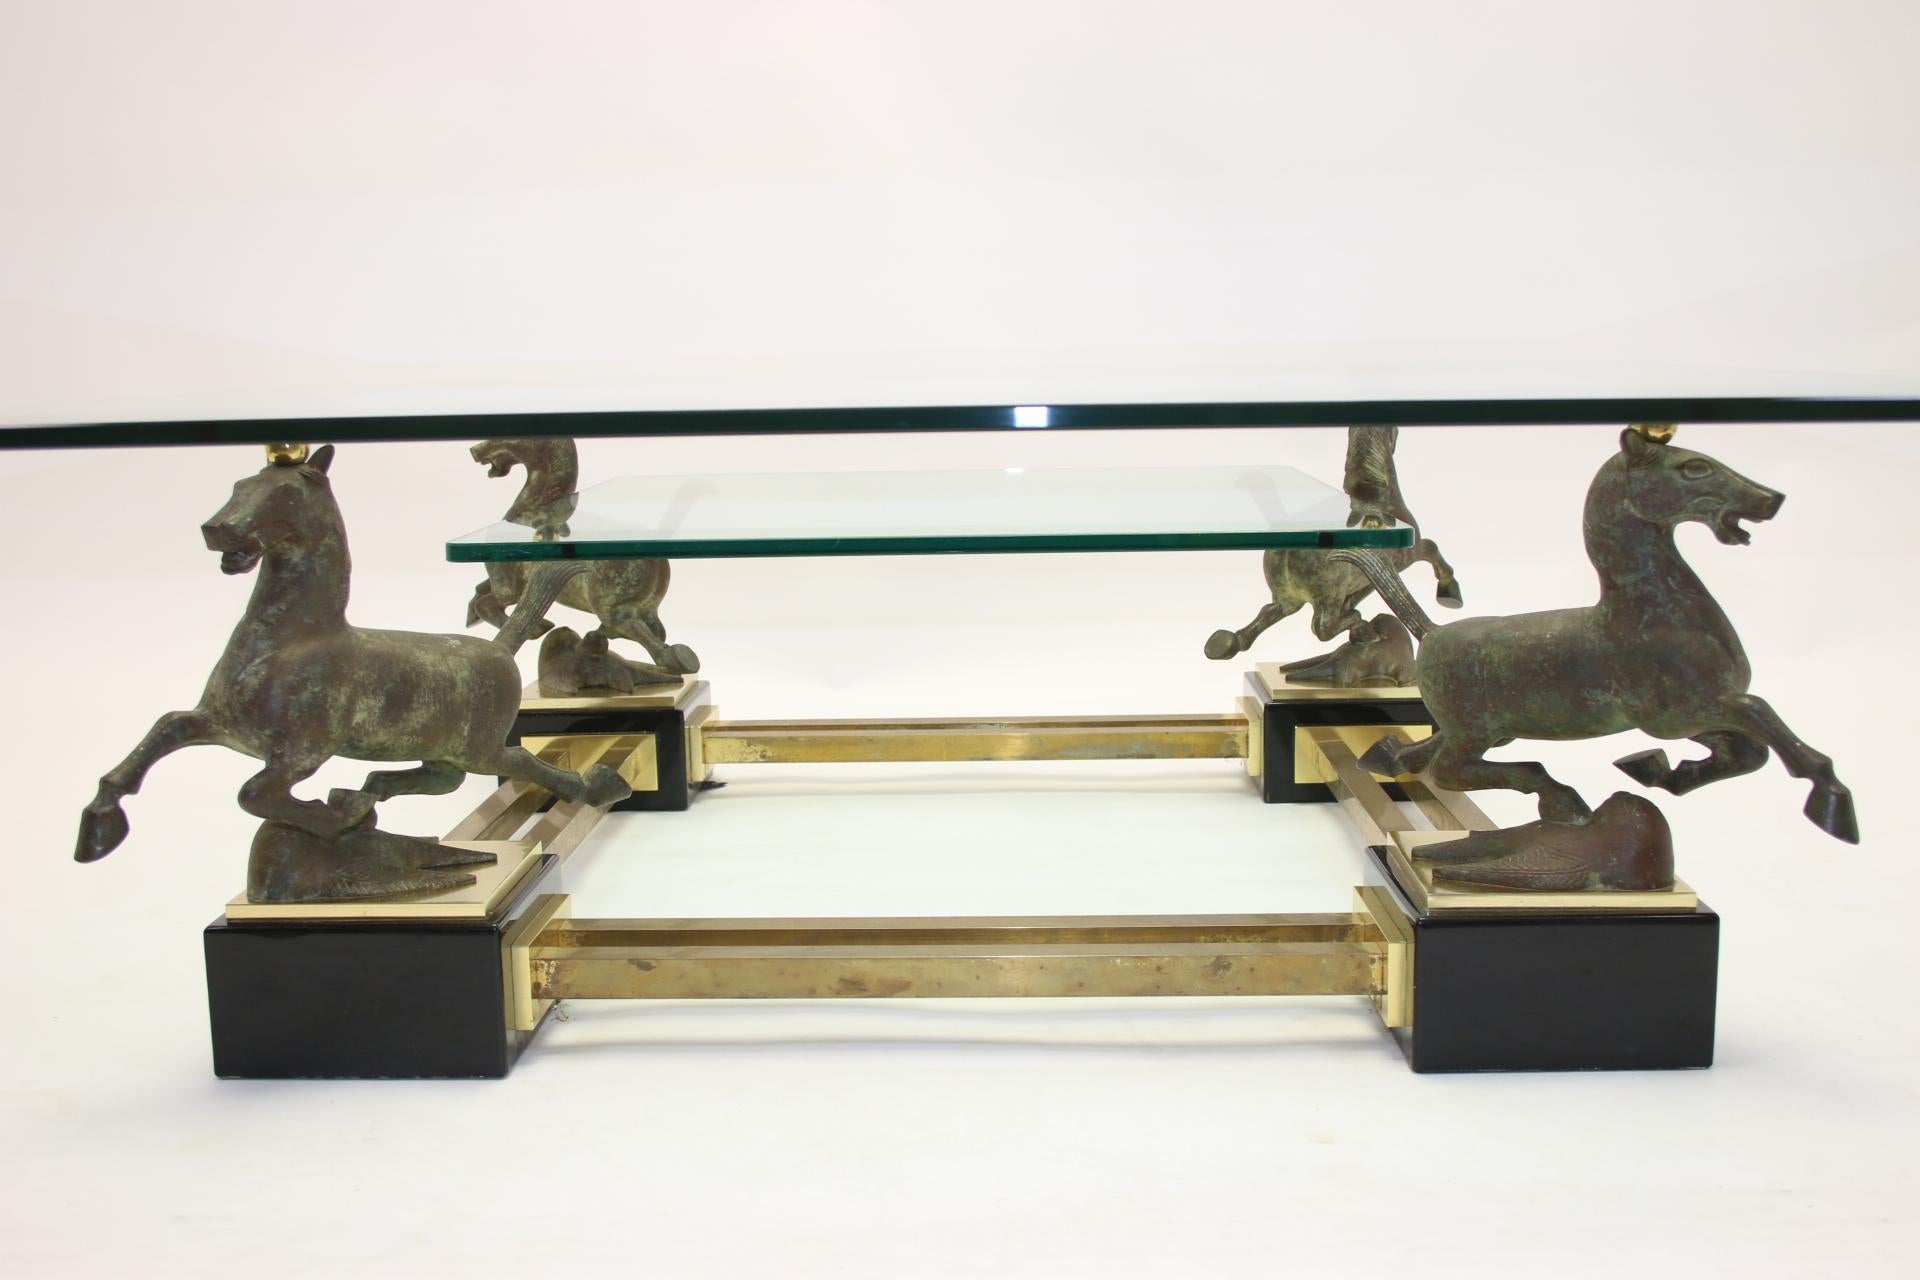 Maison Charles Bronze Coffee Table with Horses and 2 Glass Plates 4